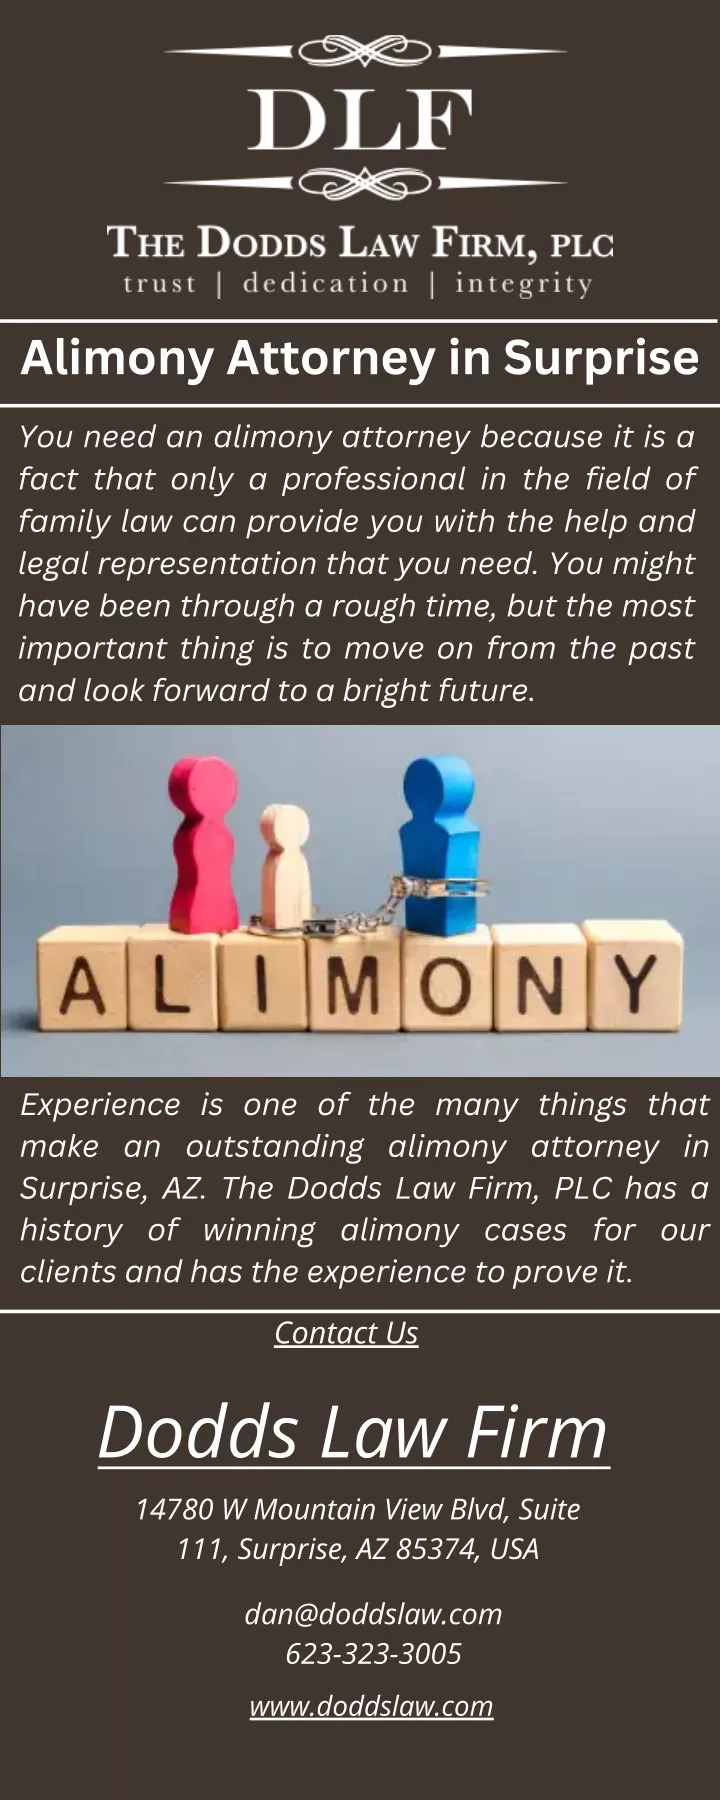 alimony attorney in surprise you need an alimony